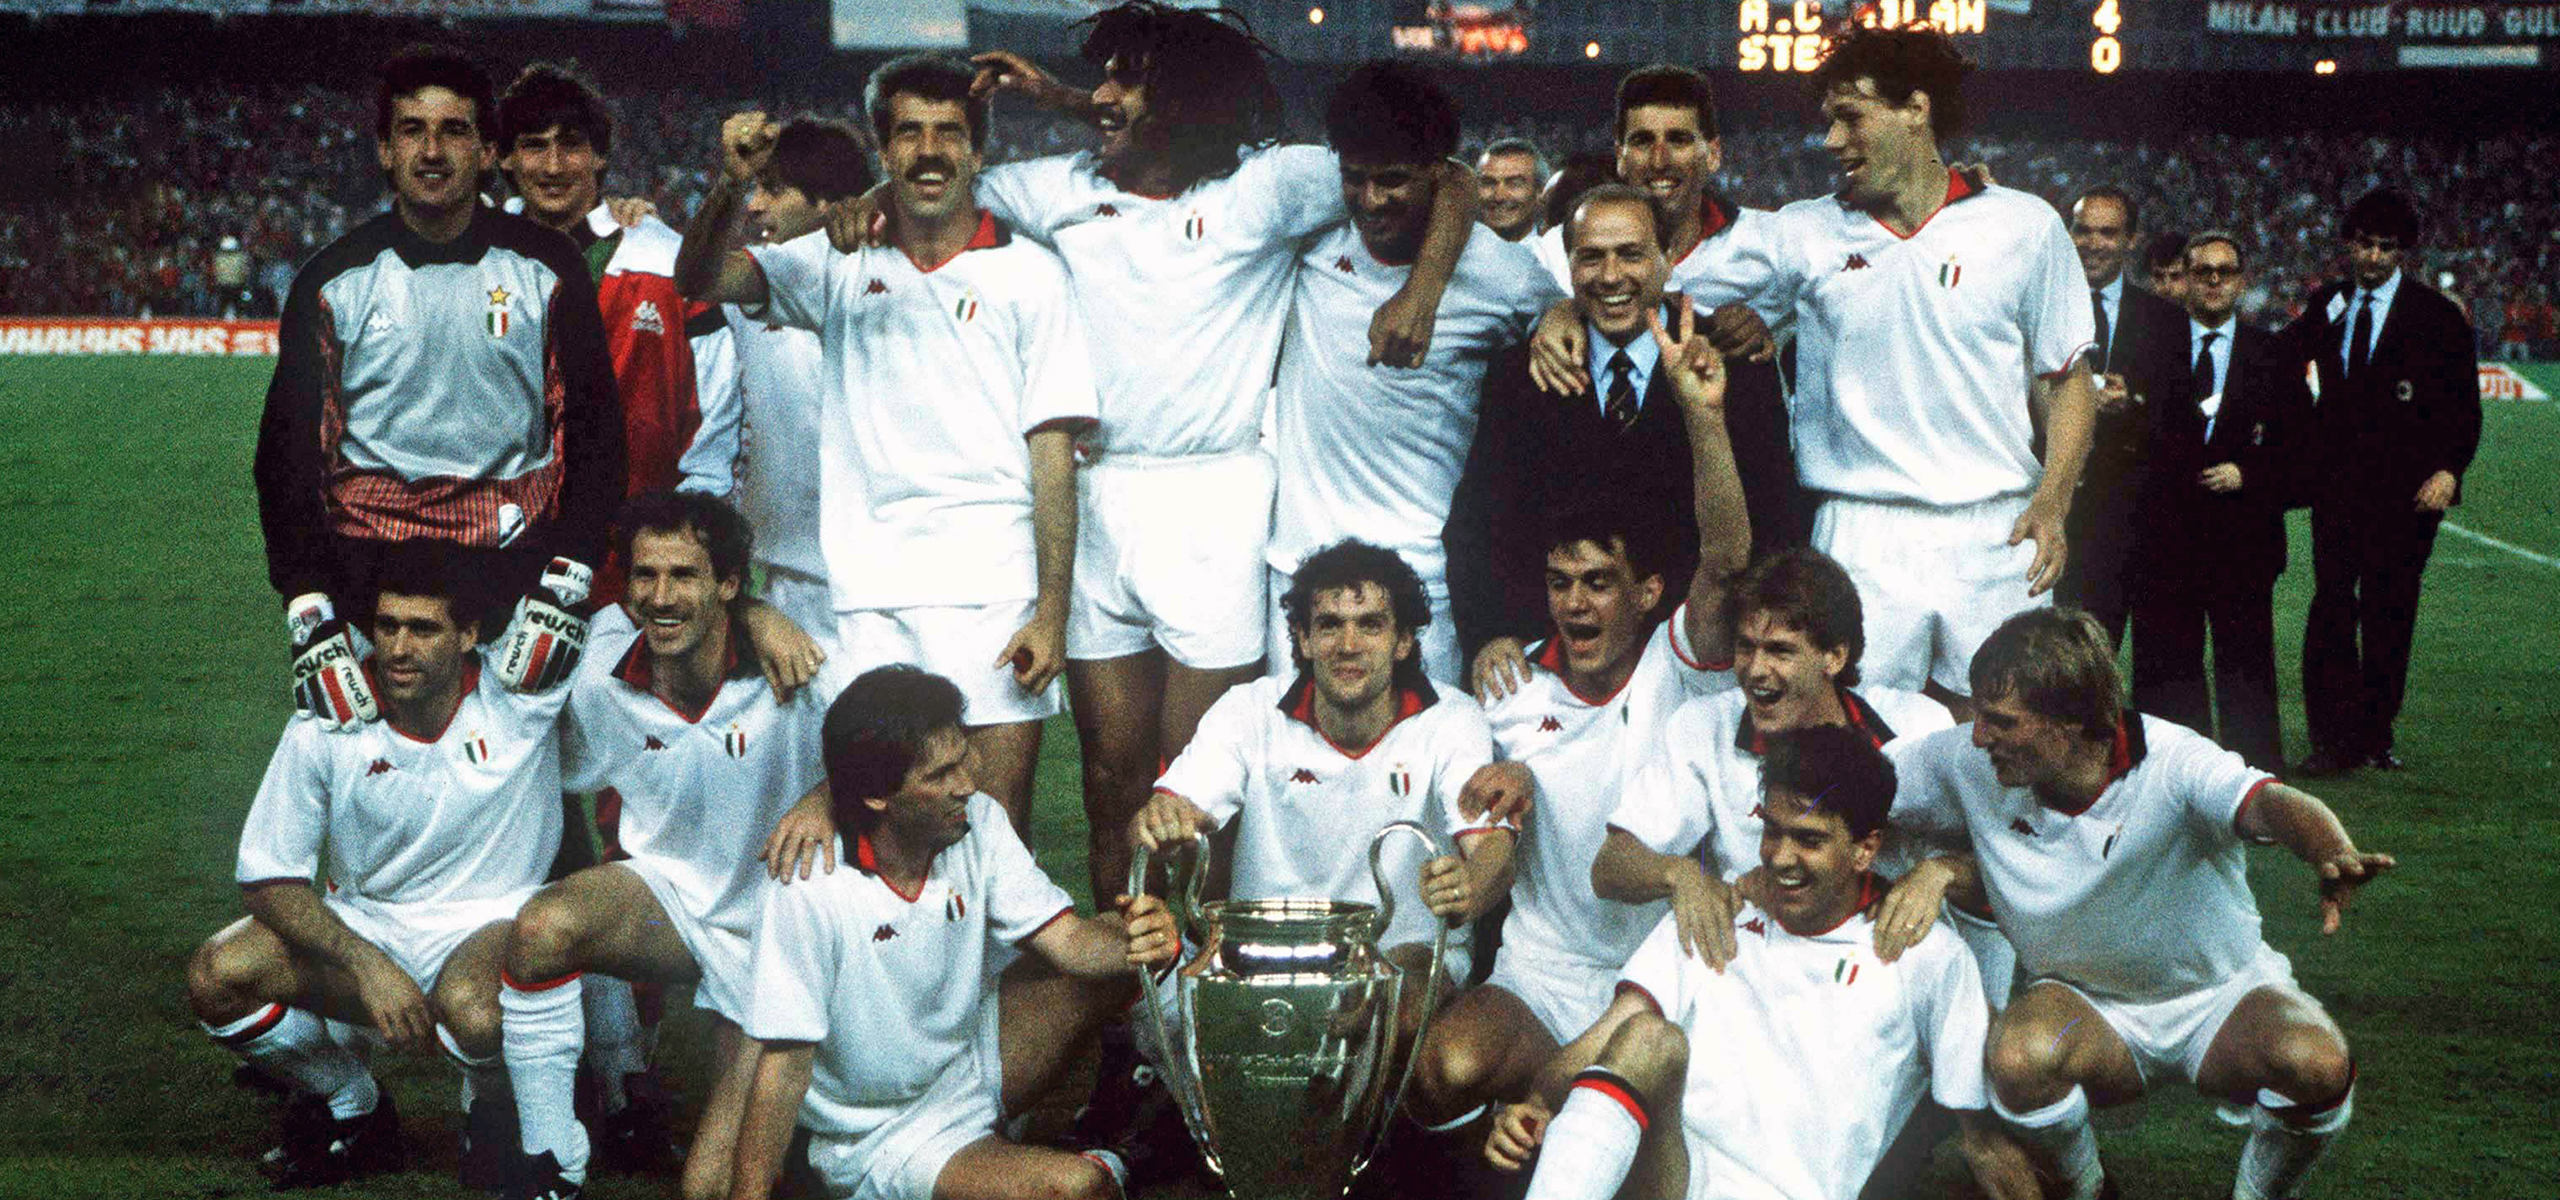 The victorious Rossoneri soccer team, clad in their iconic red-and-black striped uniforms, is captured in a moment of euphoria as they celebrate with the European Champion Clubs' Cup. The team's solidarity and joy are palpable as they pose with the prestigious trophy, embodying an era of unparalleled footballing dominance in Europe.